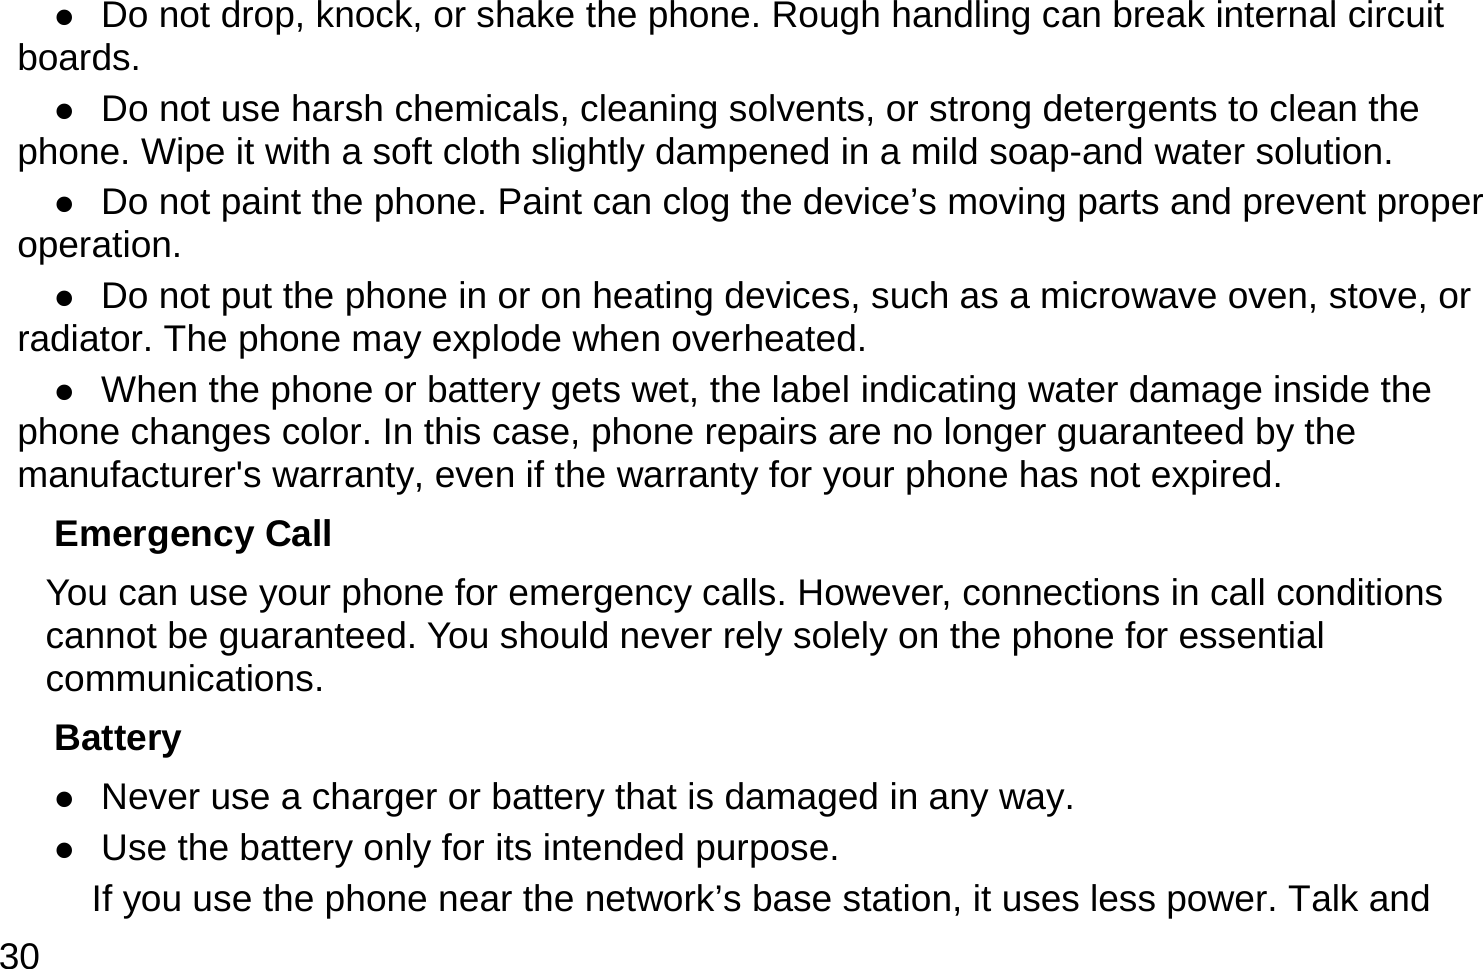  30  Do not drop, knock, or shake the phone. Rough handling can break internal circuit boards.  Do not use harsh chemicals, cleaning solvents, or strong detergents to clean the phone. Wipe it with a soft cloth slightly dampened in a mild soap-and water solution.  Do not paint the phone. Paint can clog the device’s moving parts and prevent proper operation.  Do not put the phone in or on heating devices, such as a microwave oven, stove, or radiator. The phone may explode when overheated.  When the phone or battery gets wet, the label indicating water damage inside the phone changes color. In this case, phone repairs are no longer guaranteed by the manufacturer&apos;s warranty, even if the warranty for your phone has not expired. Emergency Call You can use your phone for emergency calls. However, connections in call conditions cannot be guaranteed. You should never rely solely on the phone for essential communications. Battery  Never use a charger or battery that is damaged in any way.  Use the battery only for its intended purpose.           If you use the phone near the network’s base station, it uses less power. Talk and 